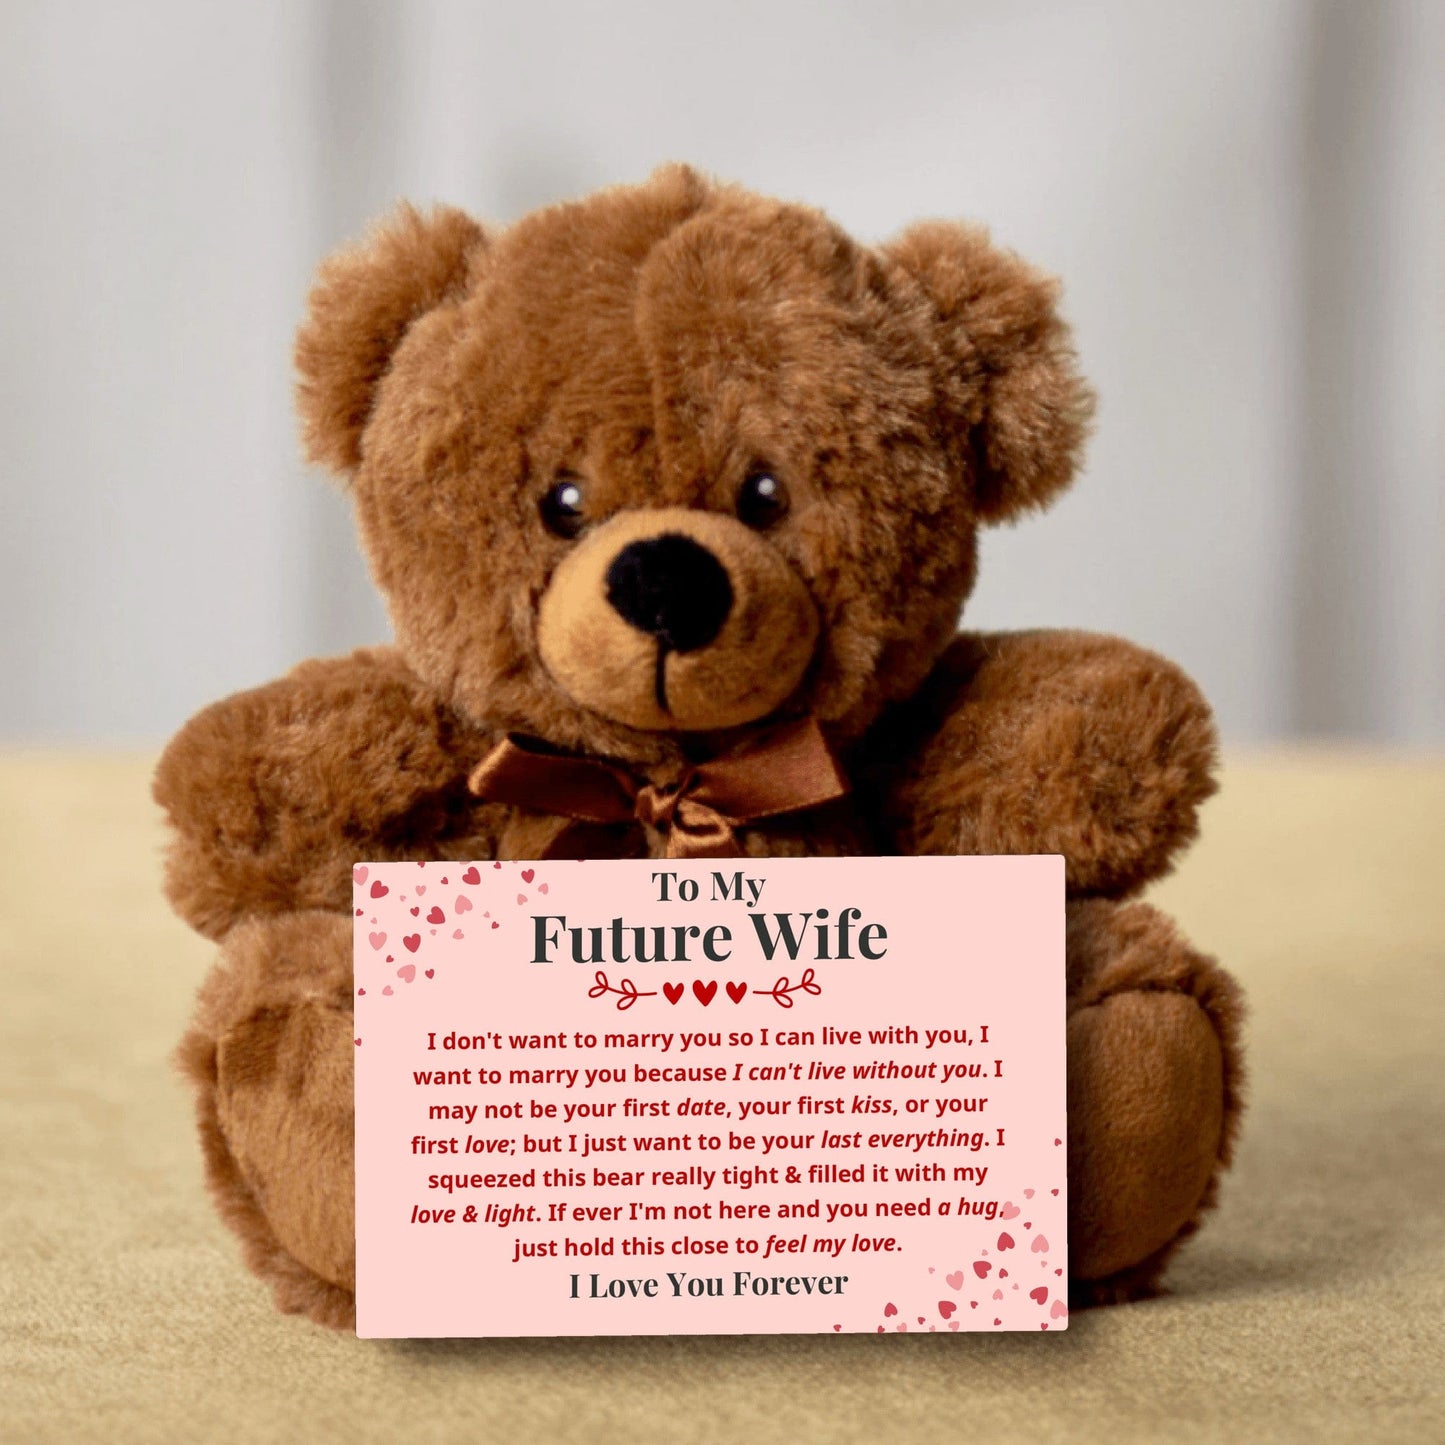 To My Future Wife - Want To Marry You - Plush Bear With Message